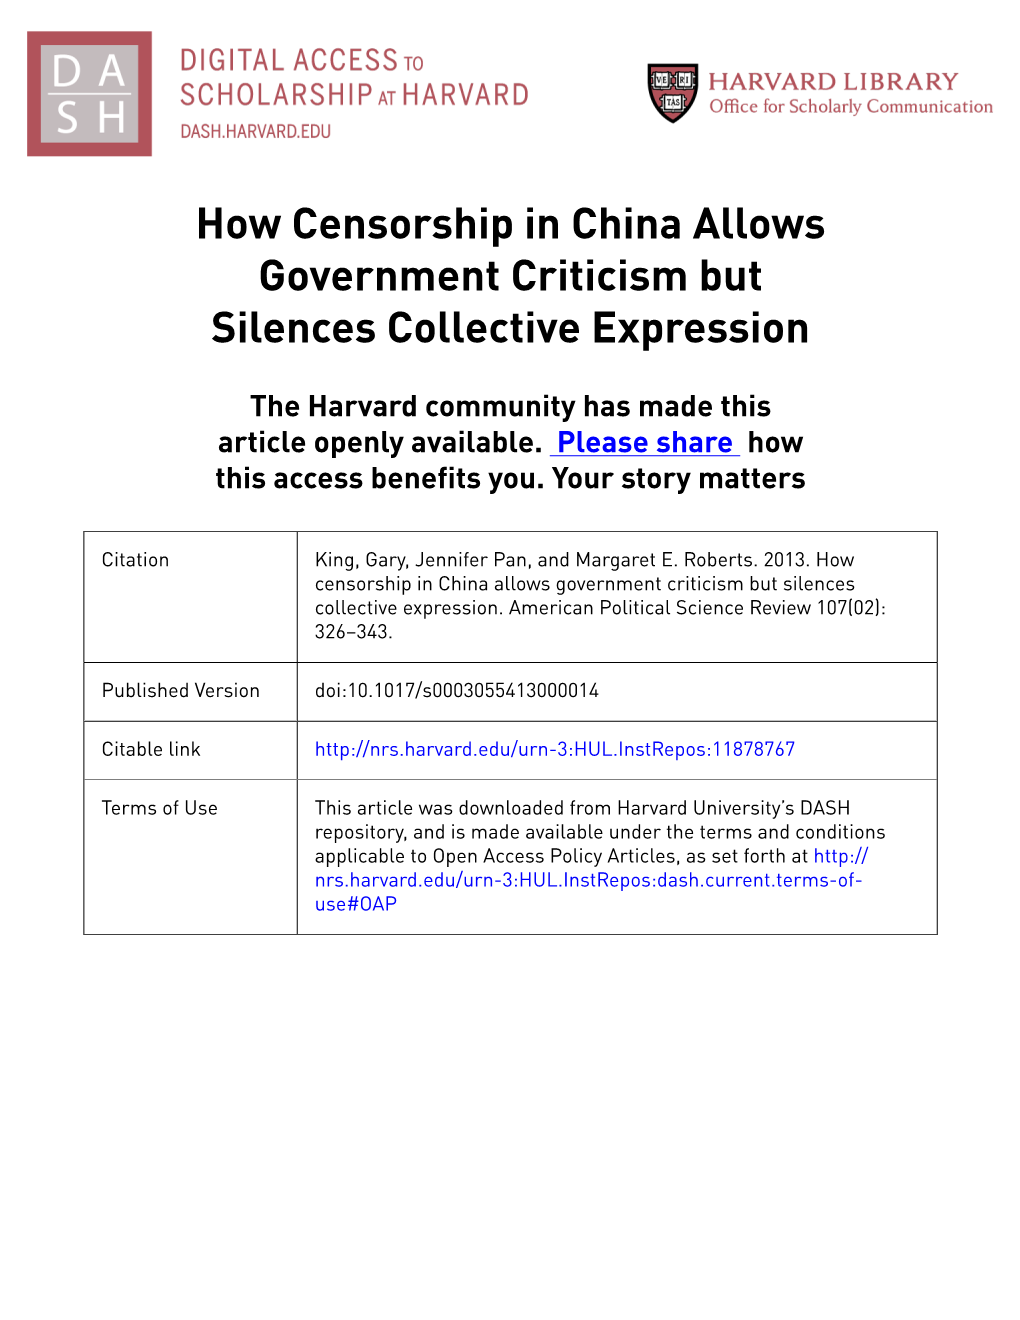 How Censorship in China Allows Government Criticism but Silences Collective Expression